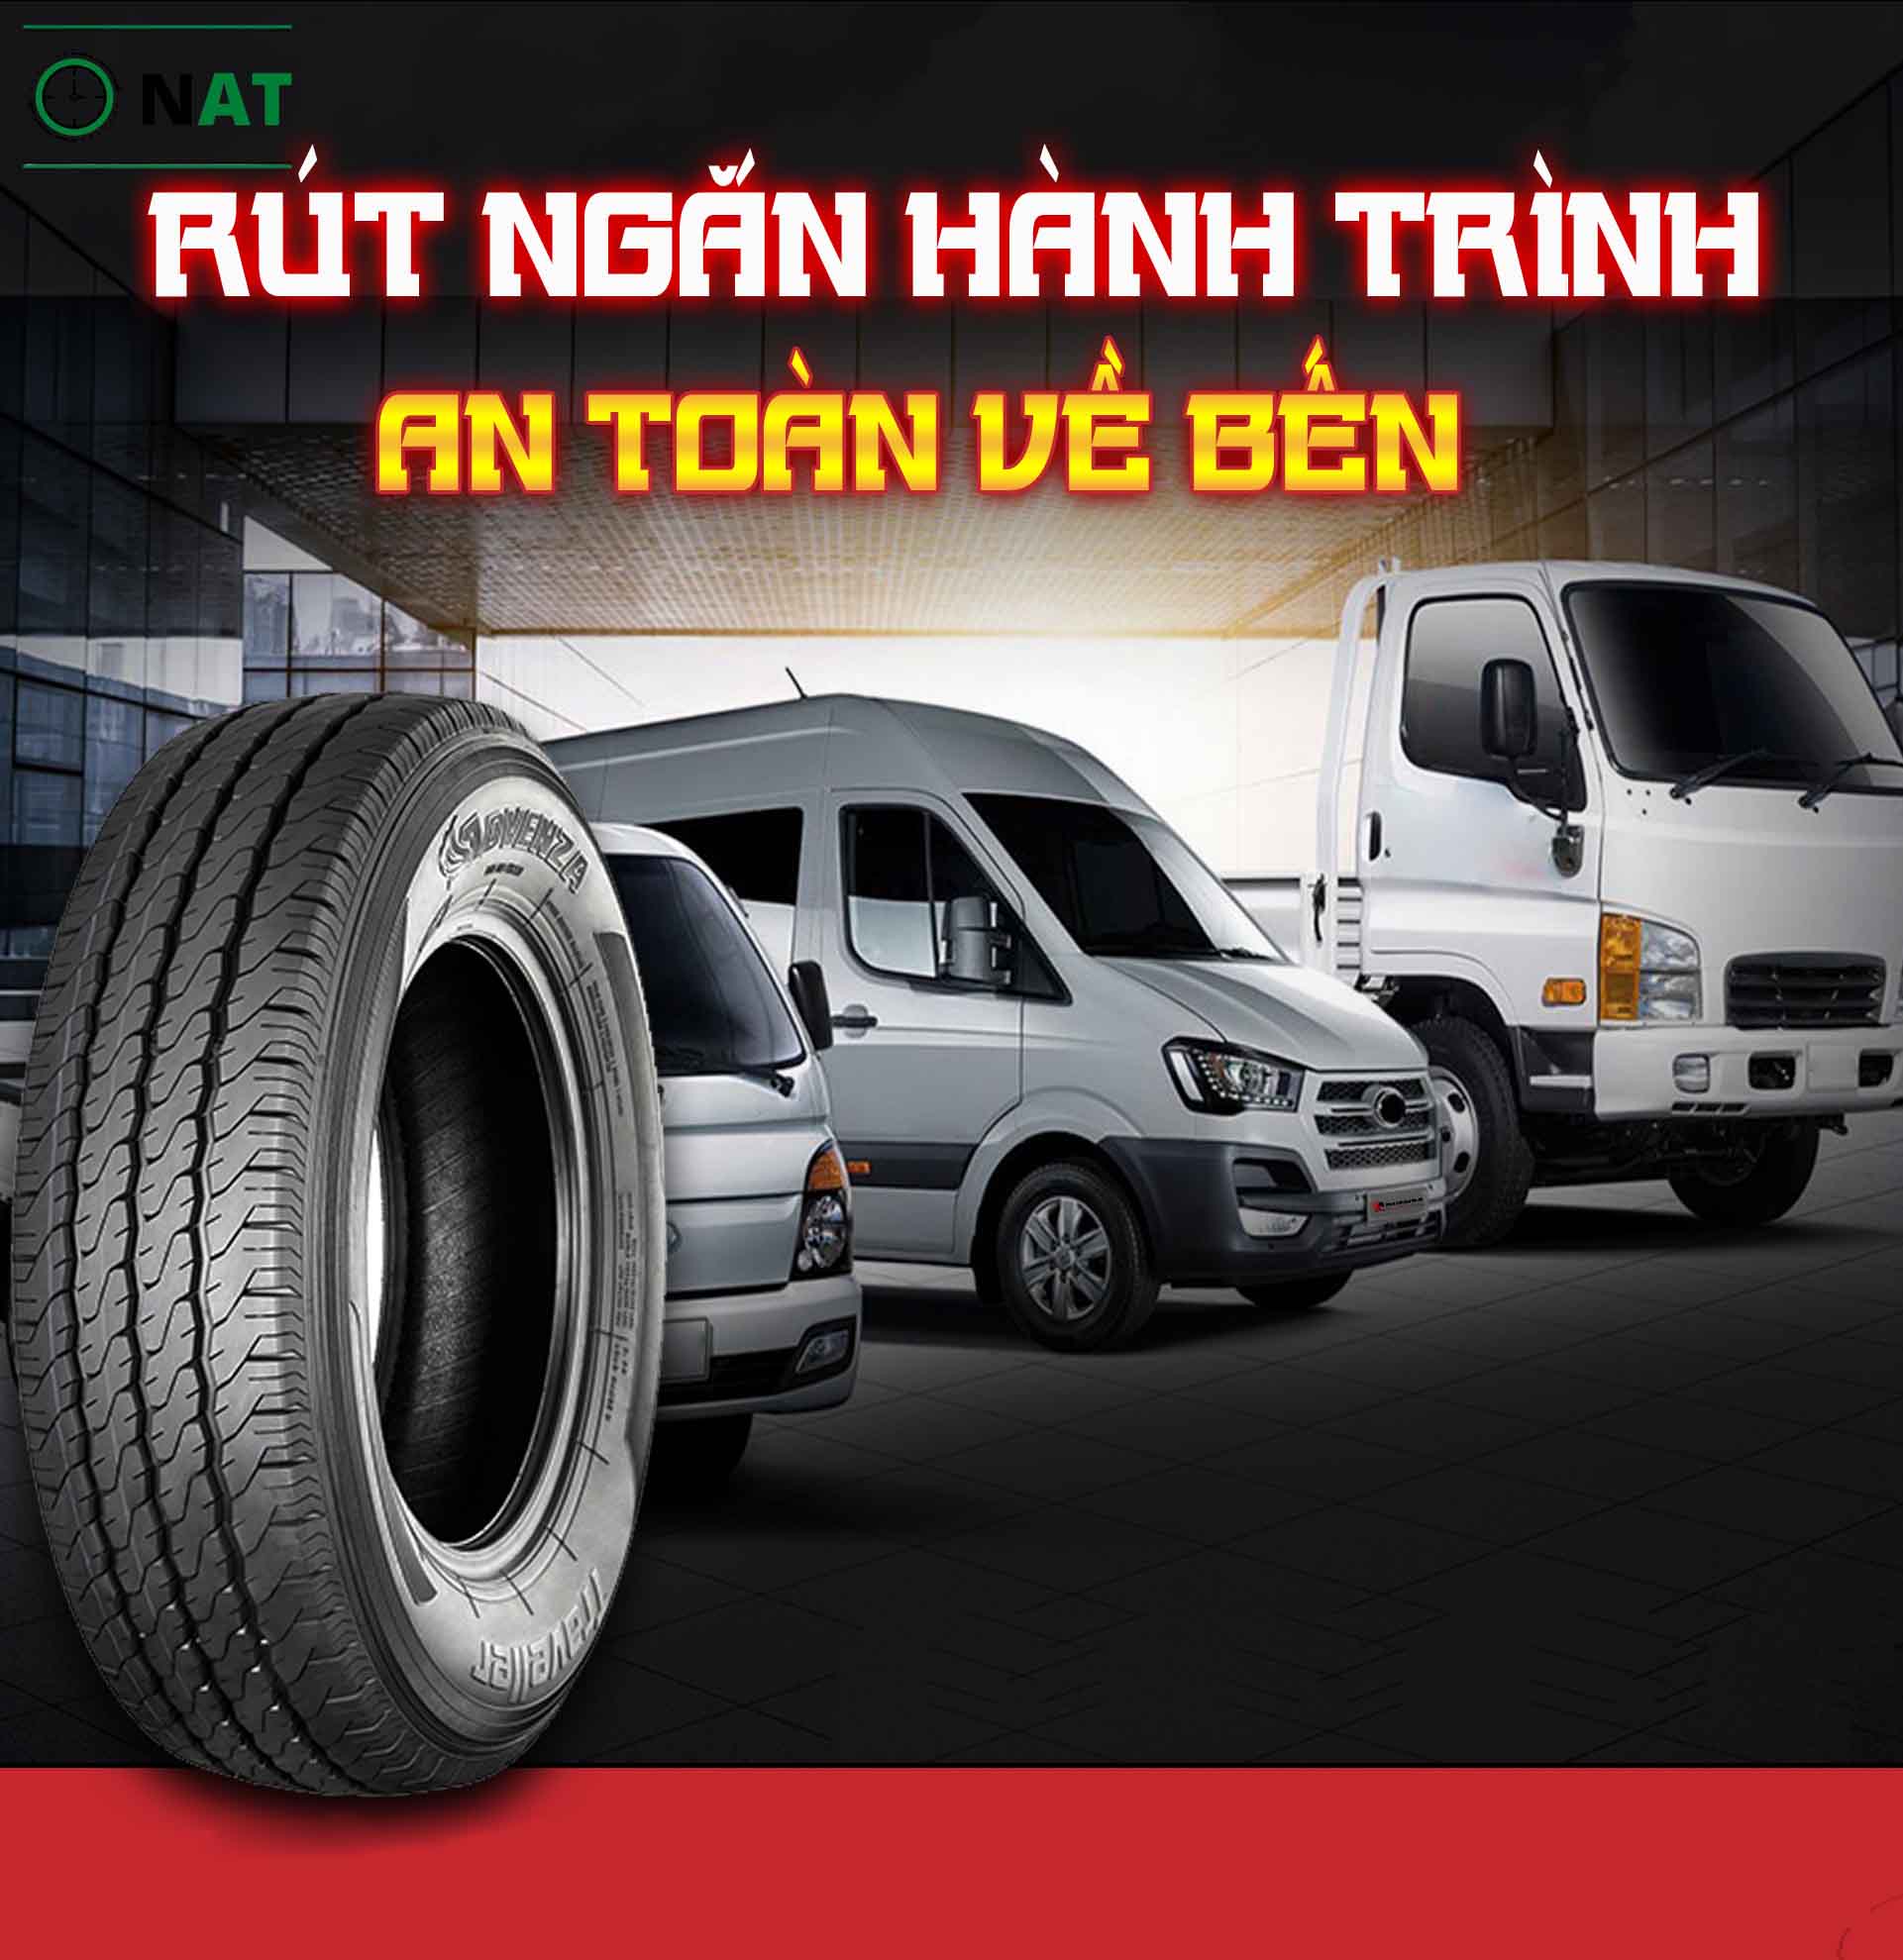 giá lốp xe Advenza TL 215/75R16C Traveller AT666 113/111S